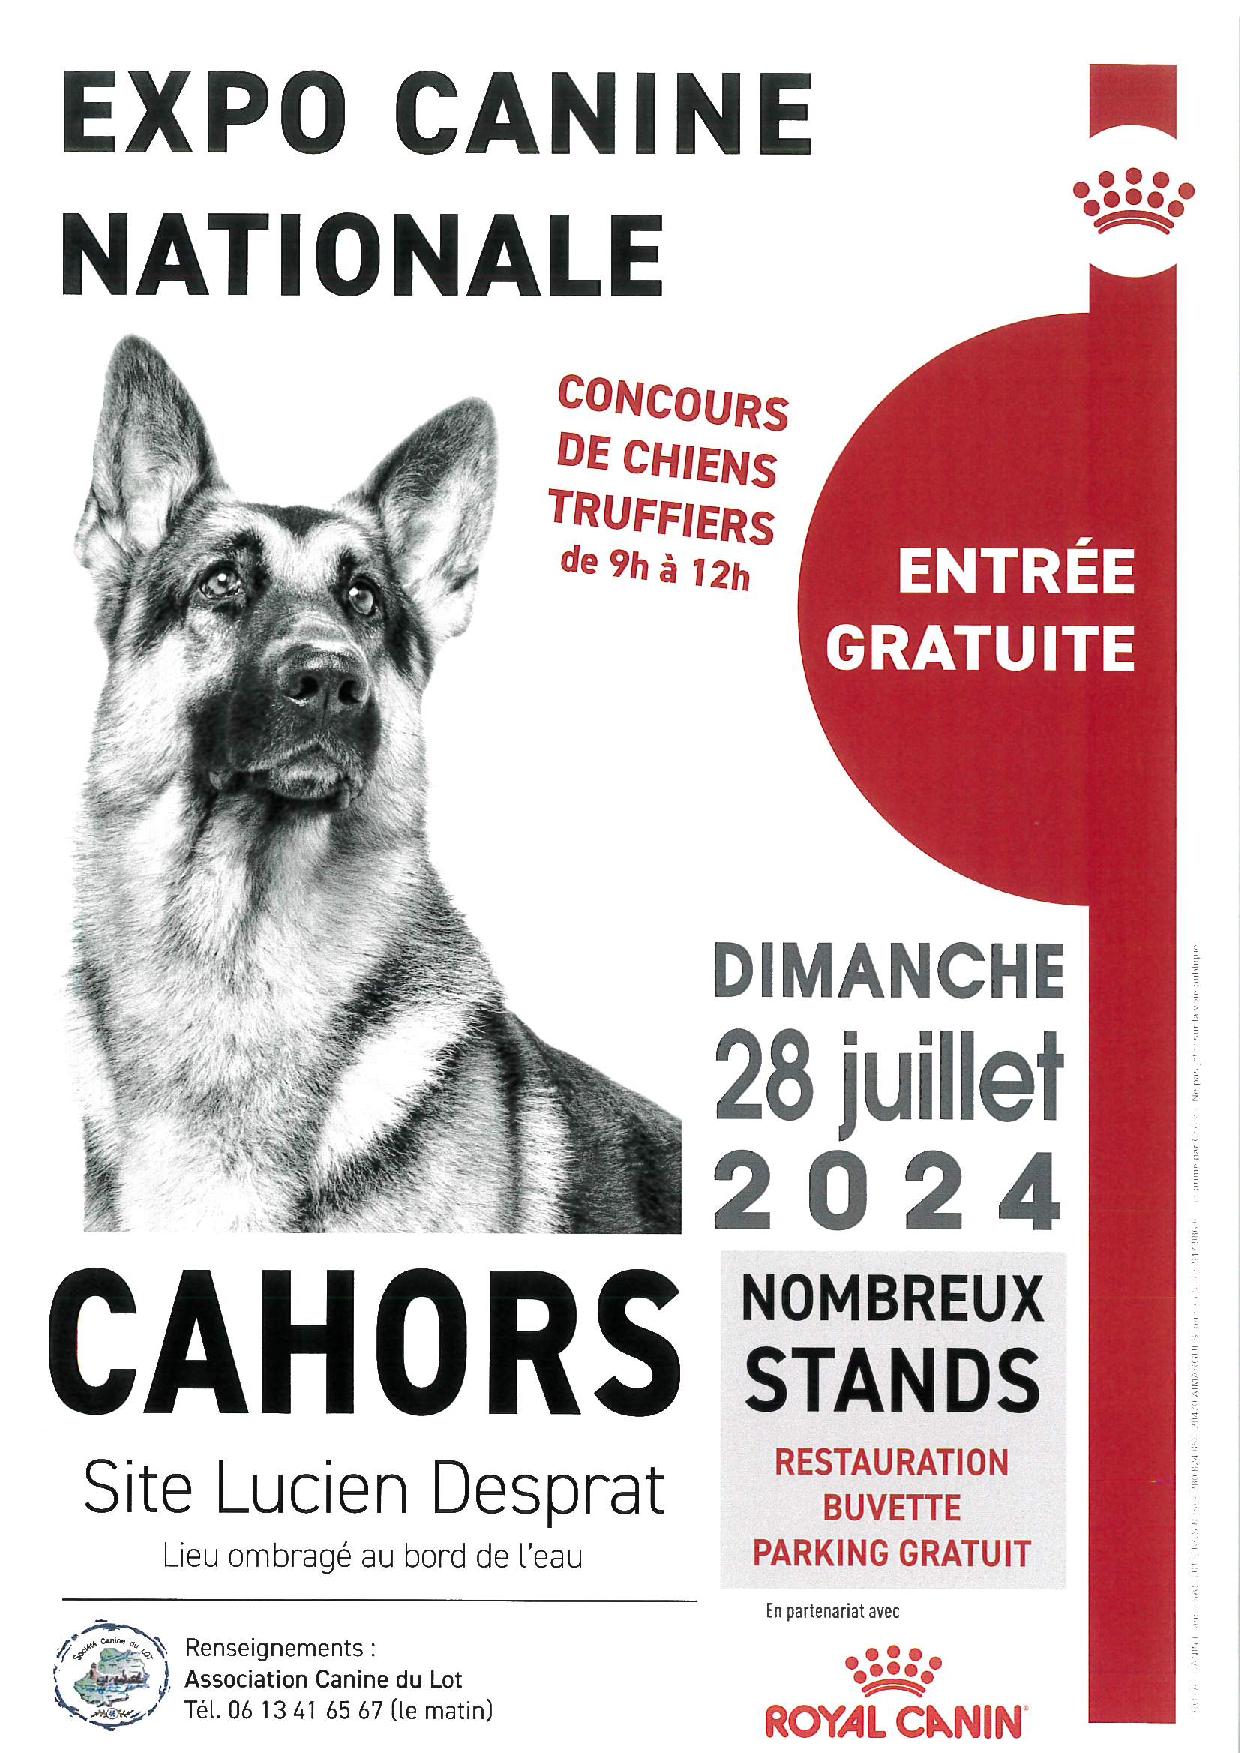 Figeac : Exposition canine nationale